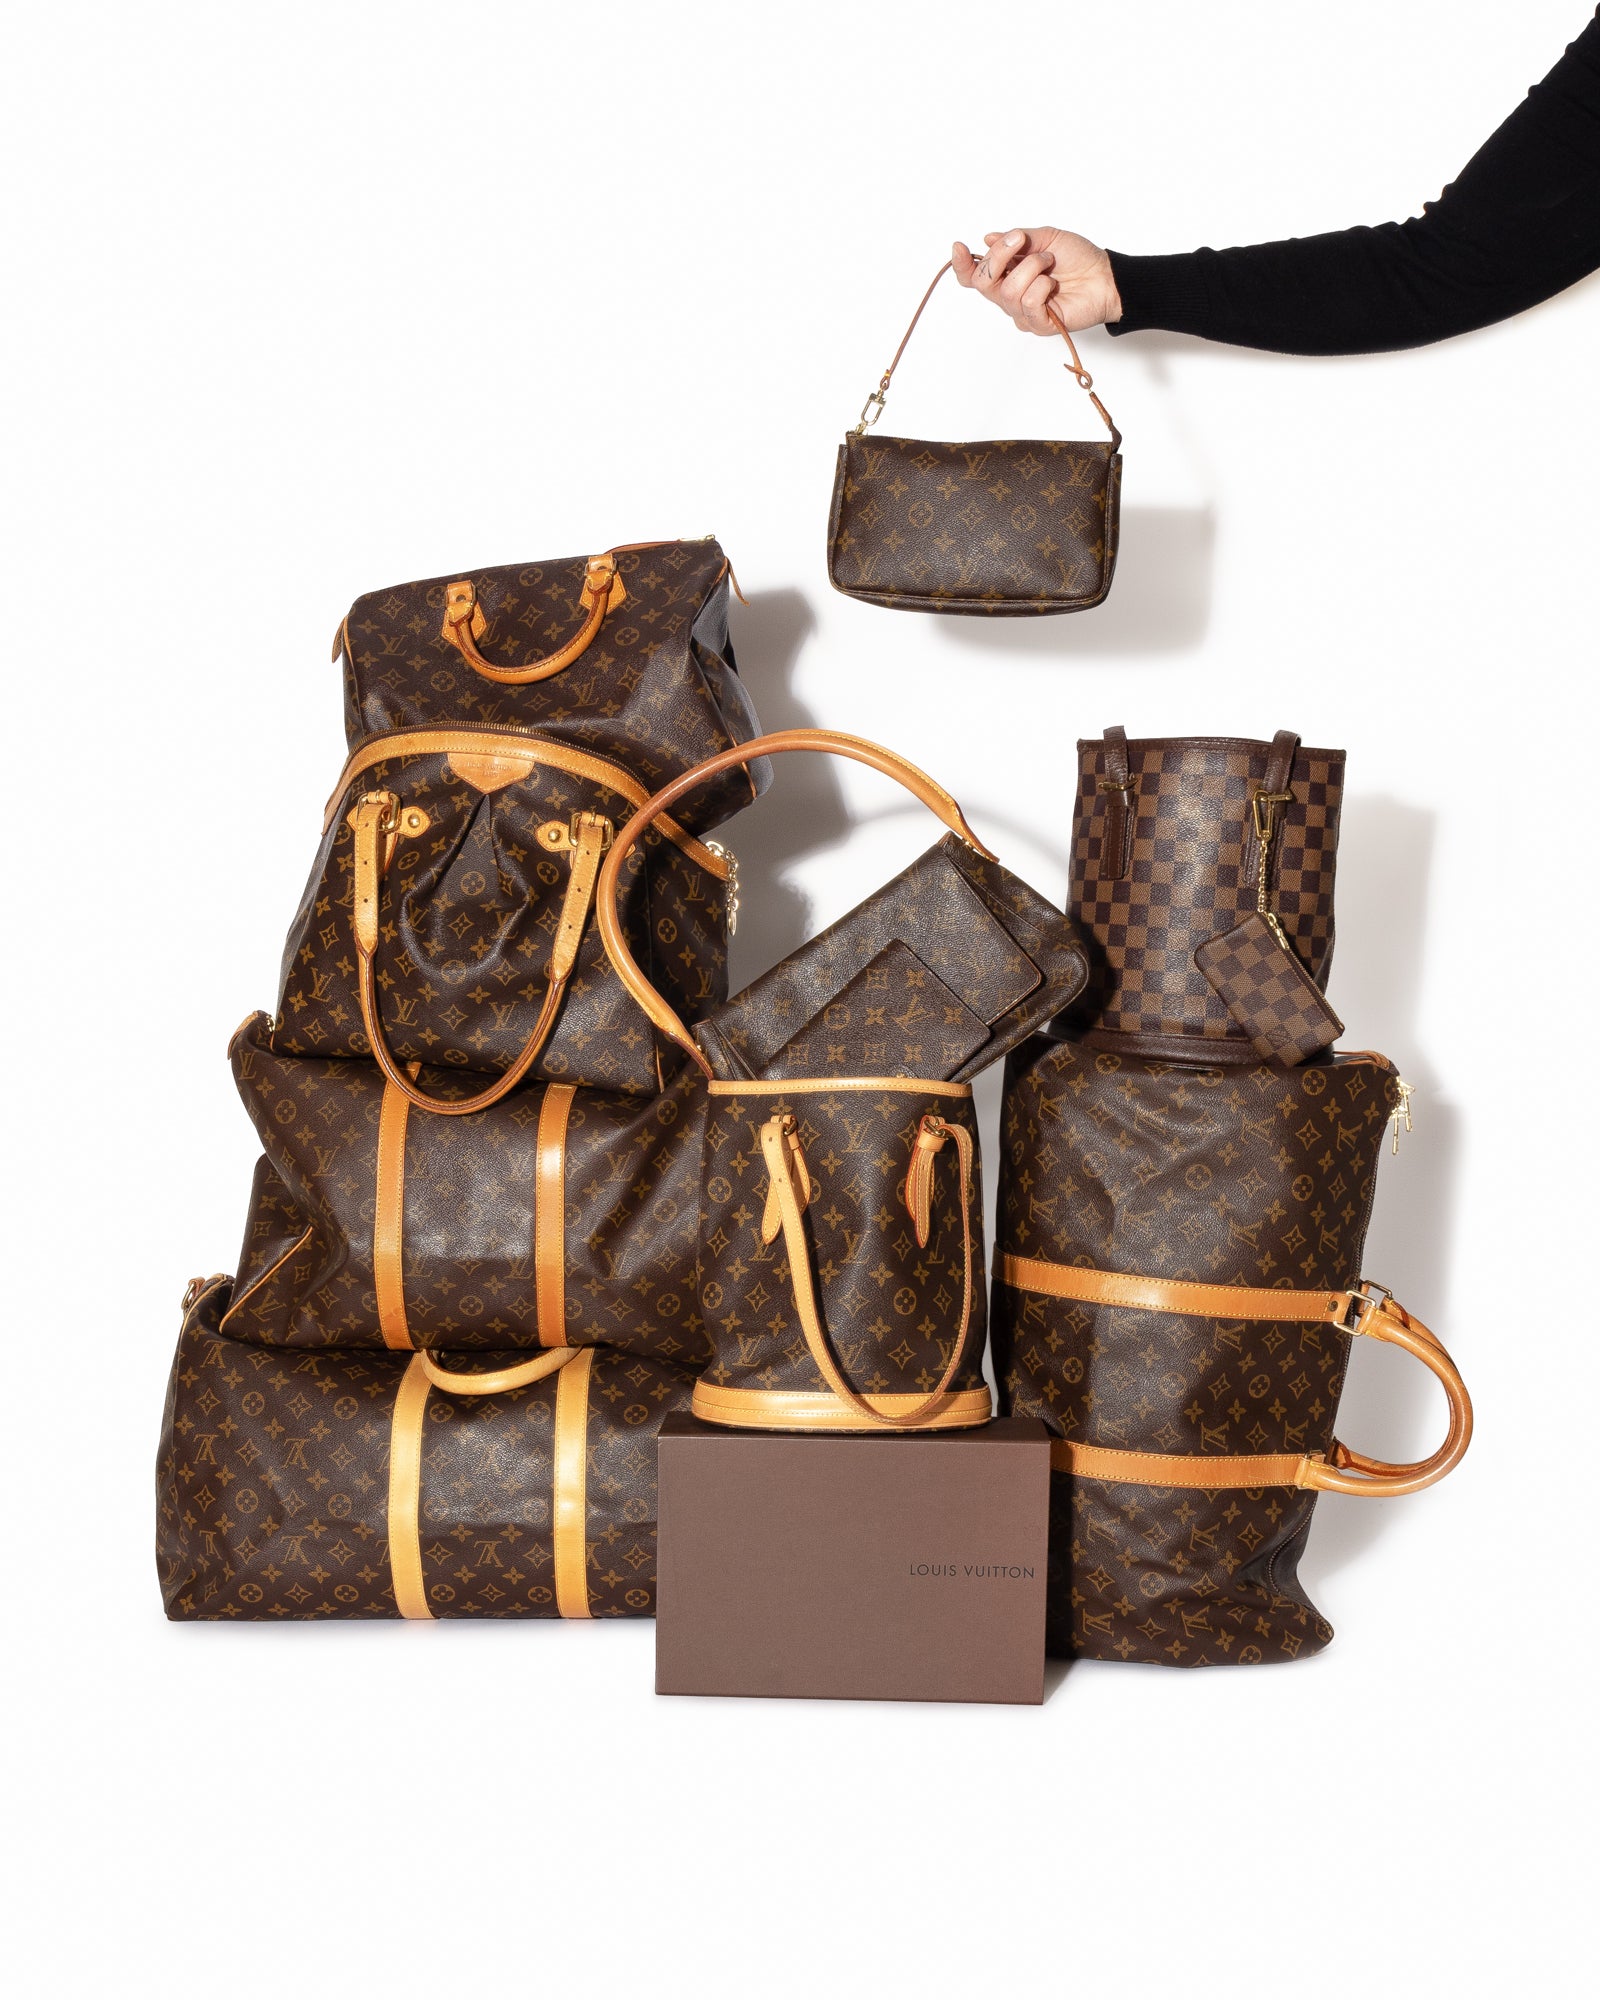 The Best Luxury Fashion Items You Can Rent -- Chanel Earrings, Louis Vuitton  Bag & More!